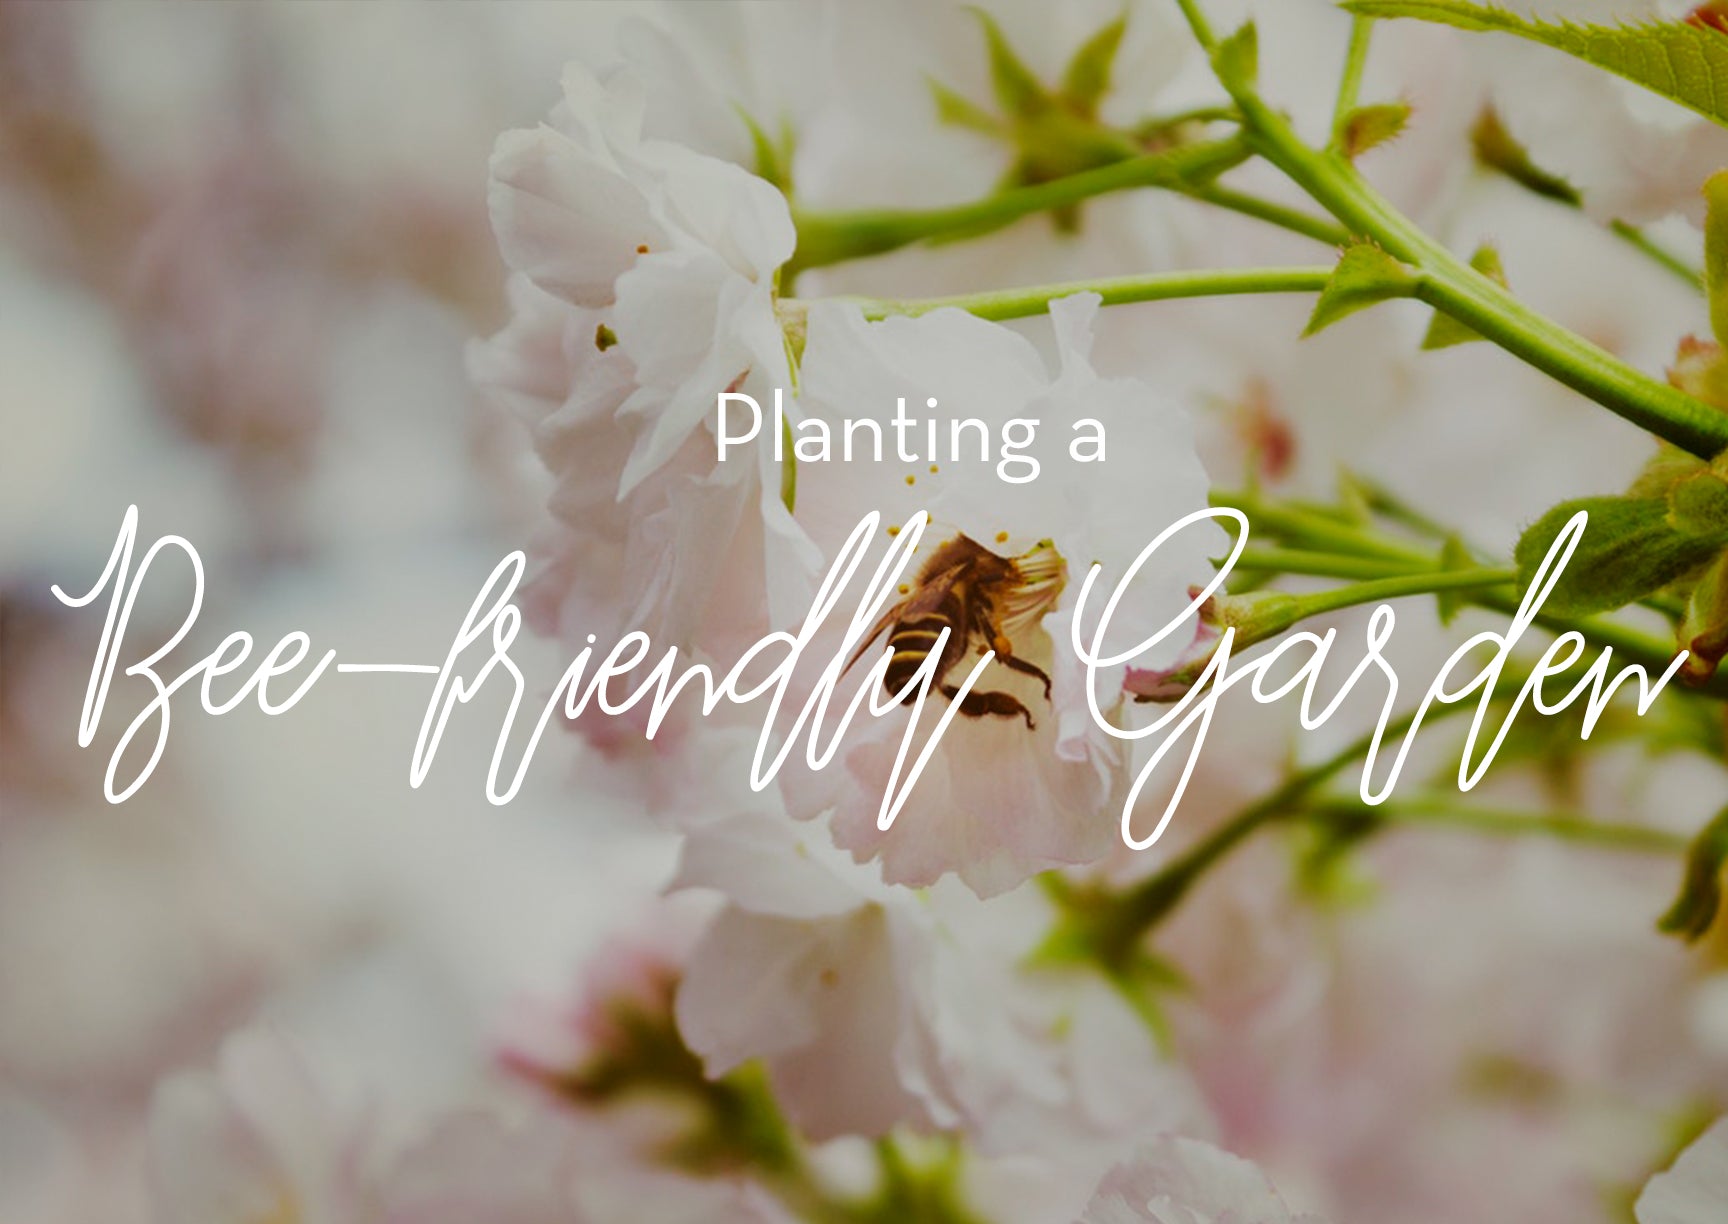 Drizzle Honey How to Plant a Bee-friendly Garden